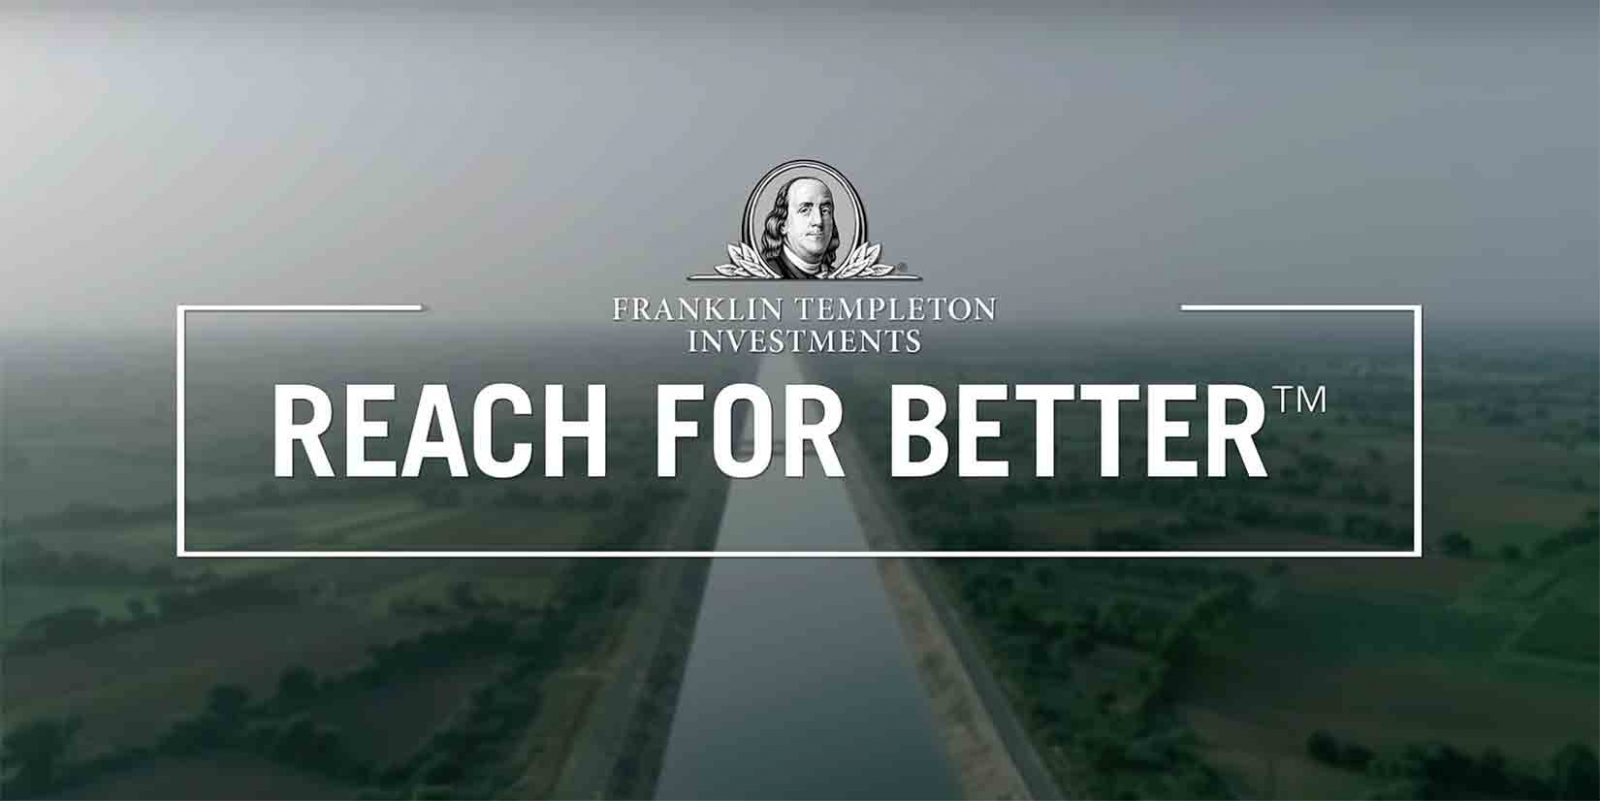 Reach for Better - Franklin Templeton Investments & The Better India